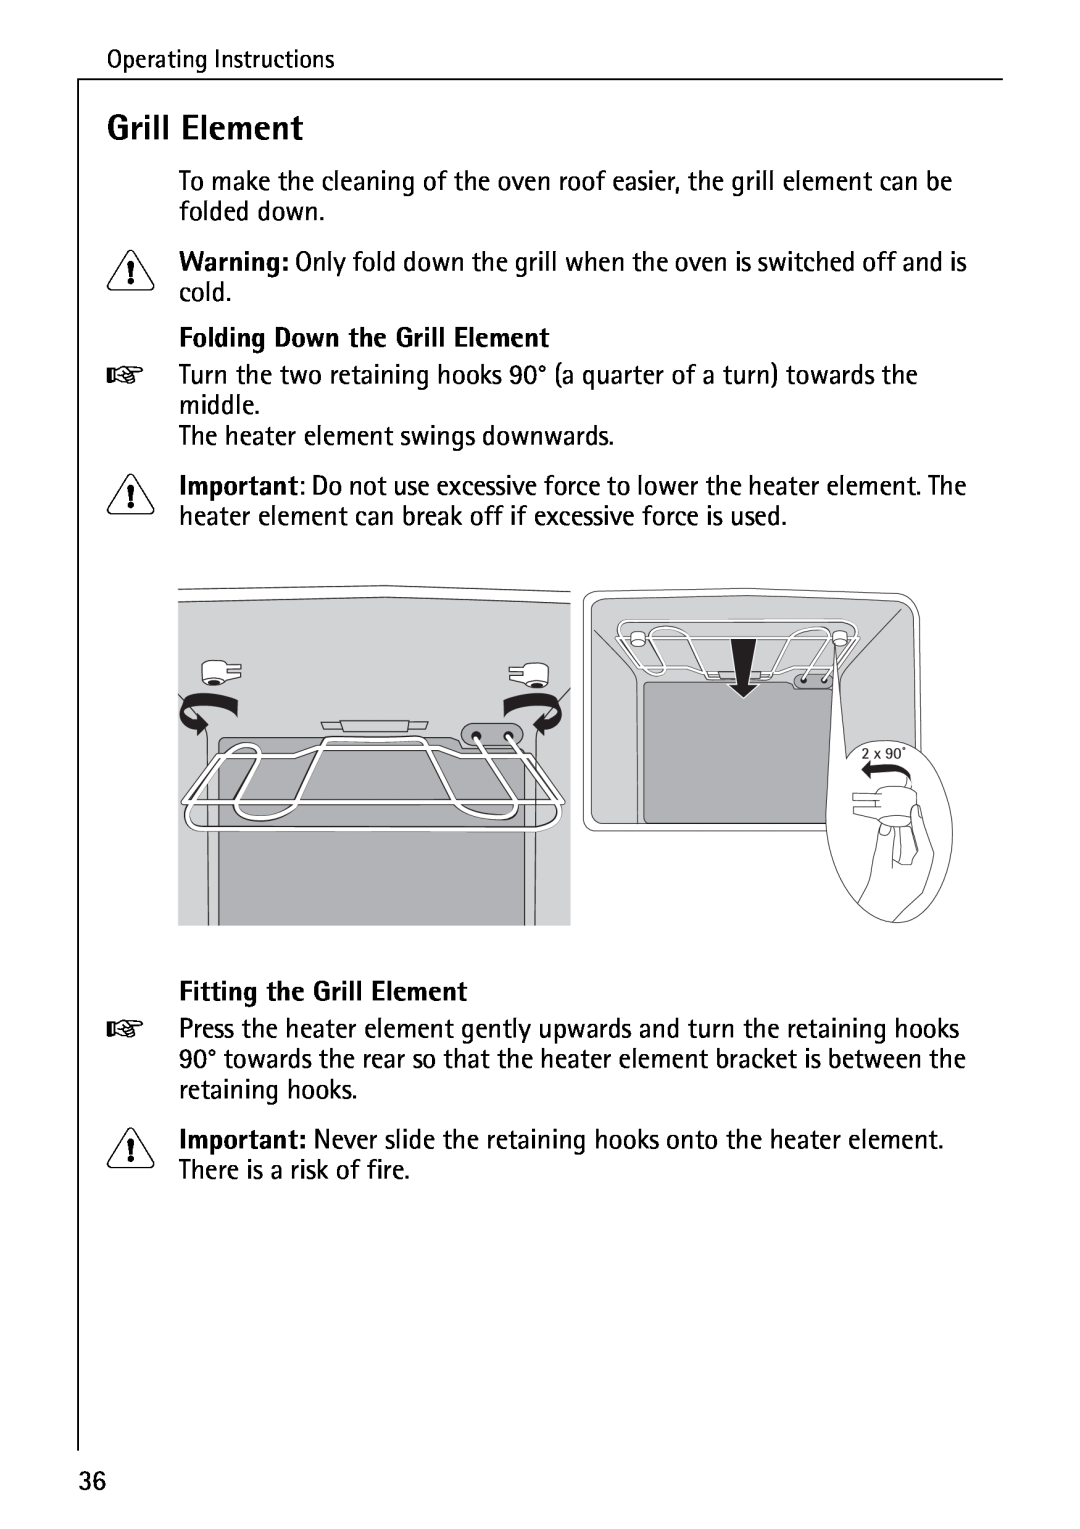 AEG B 2100 operating instructions cold, Folding Down the Grill Element, Fitting the Grill Element 